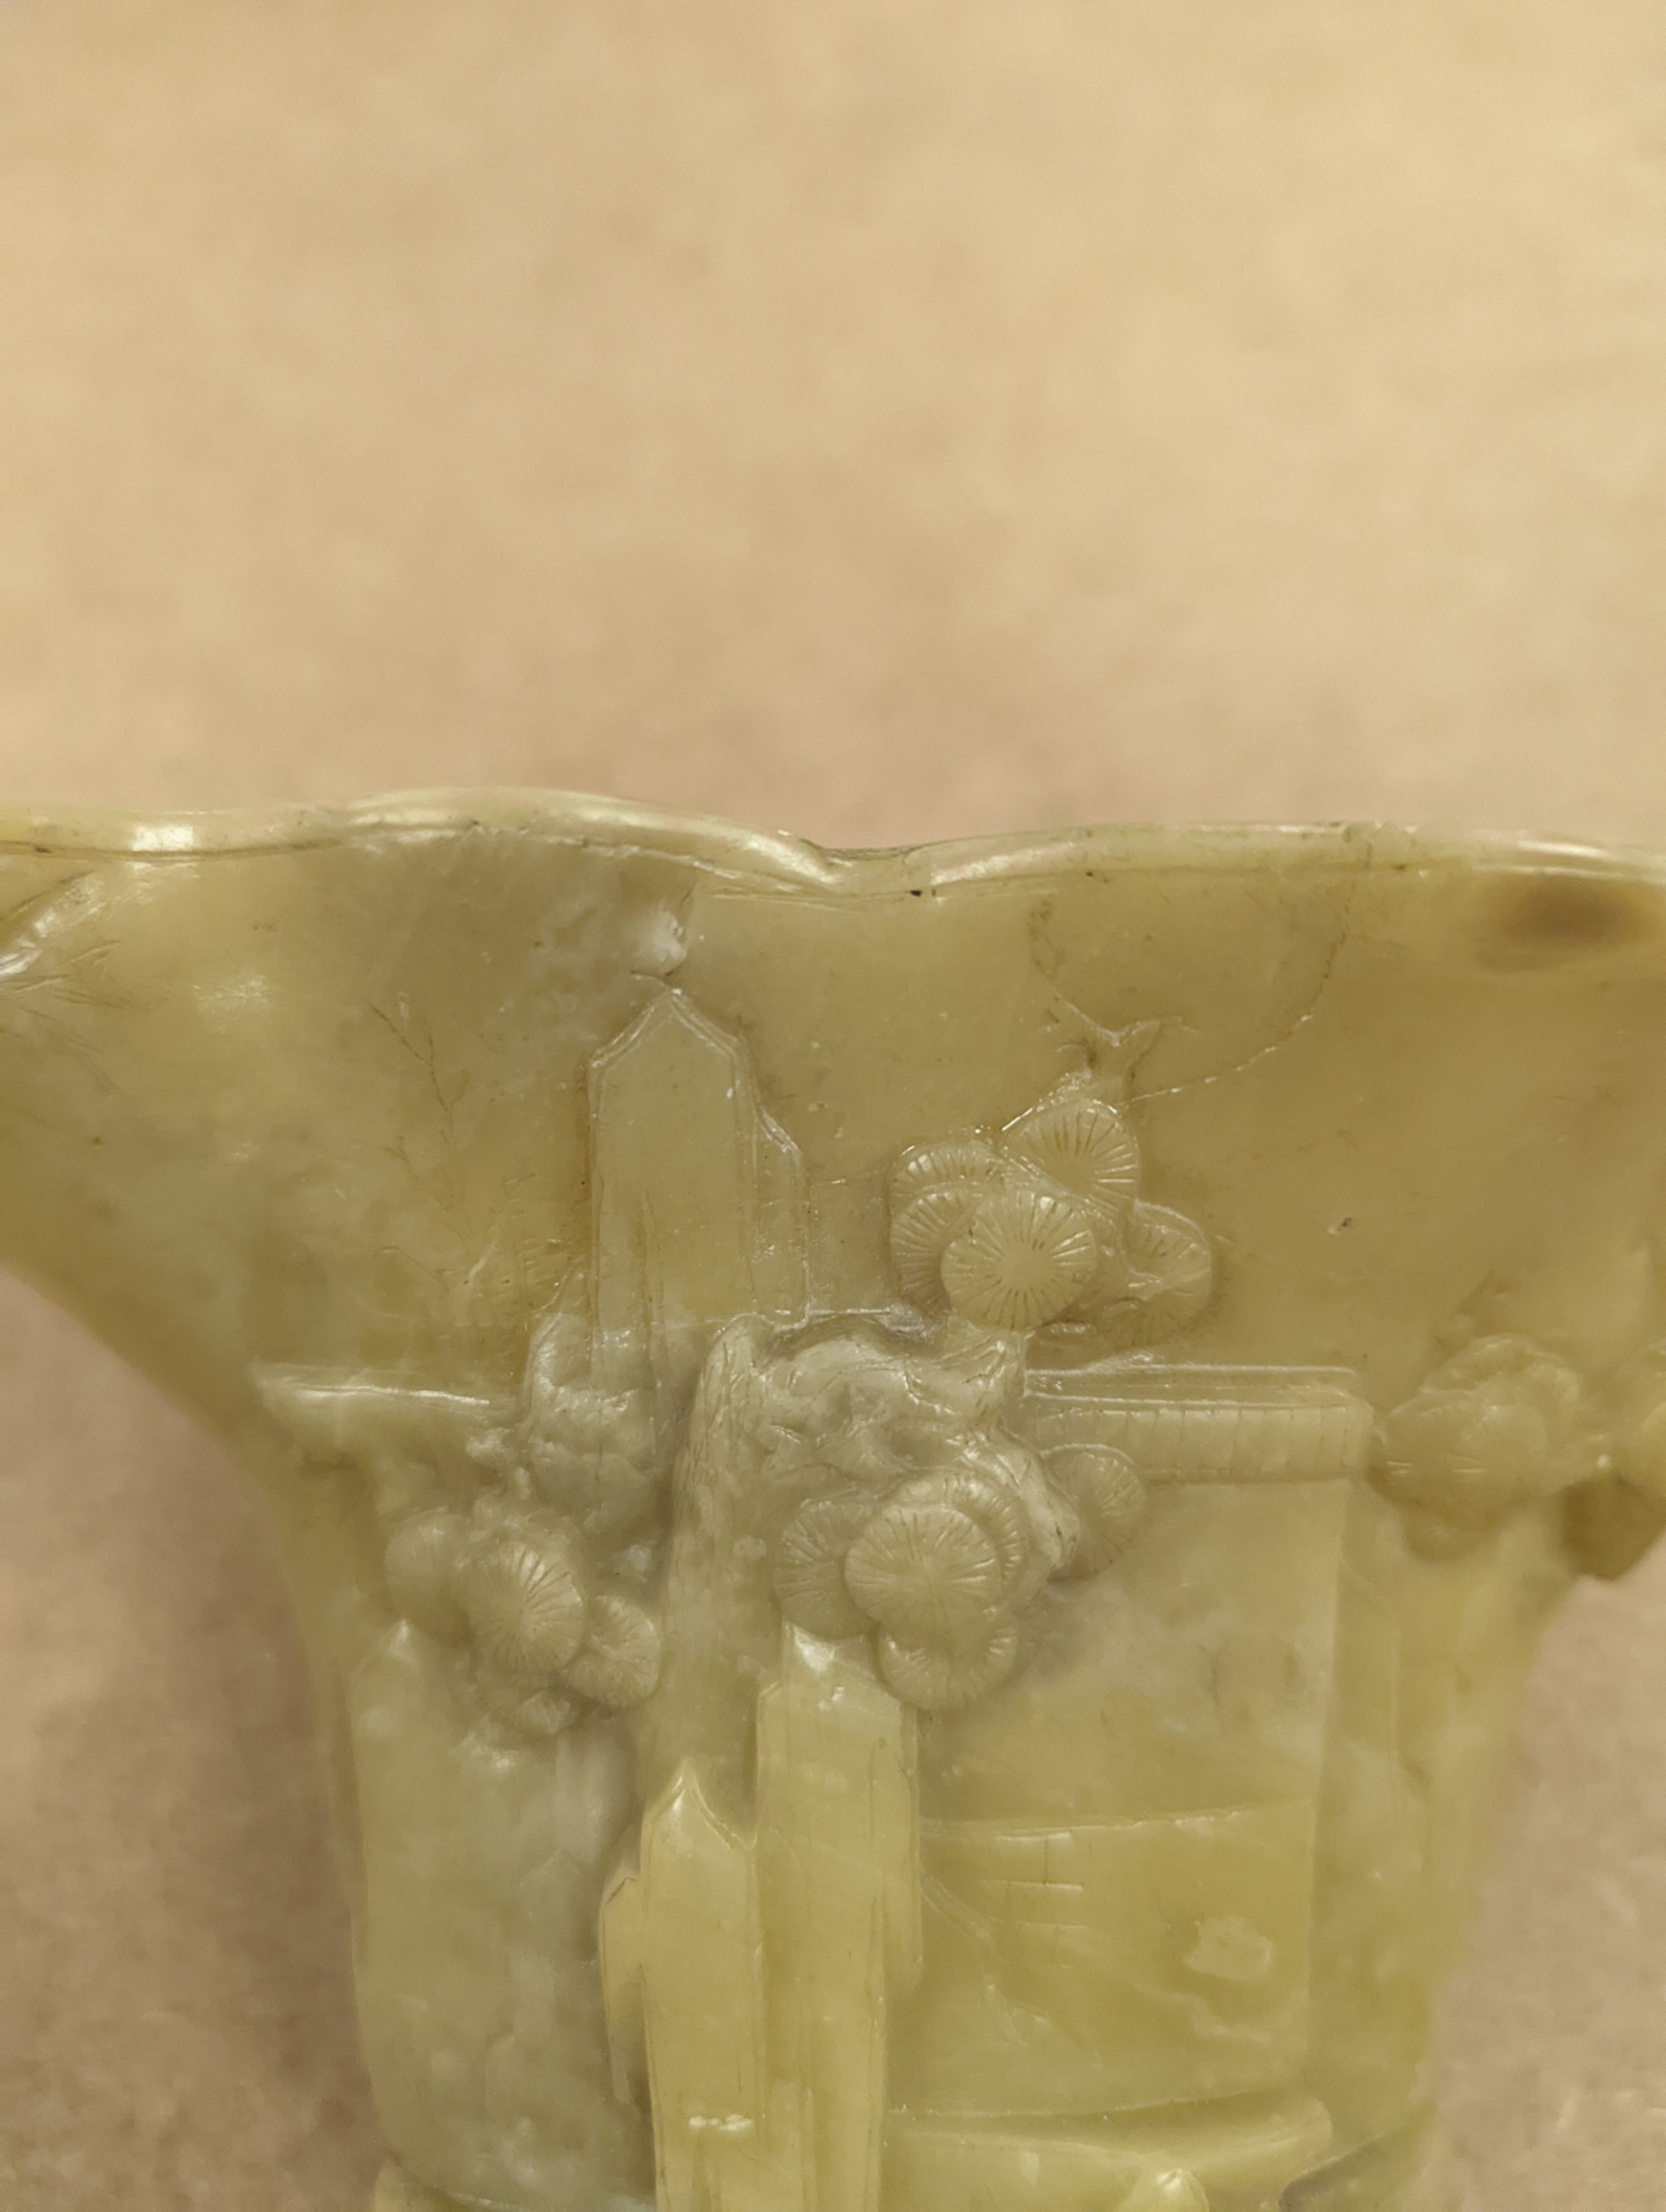 A Chinese carved soapstone libation cup, 19cm